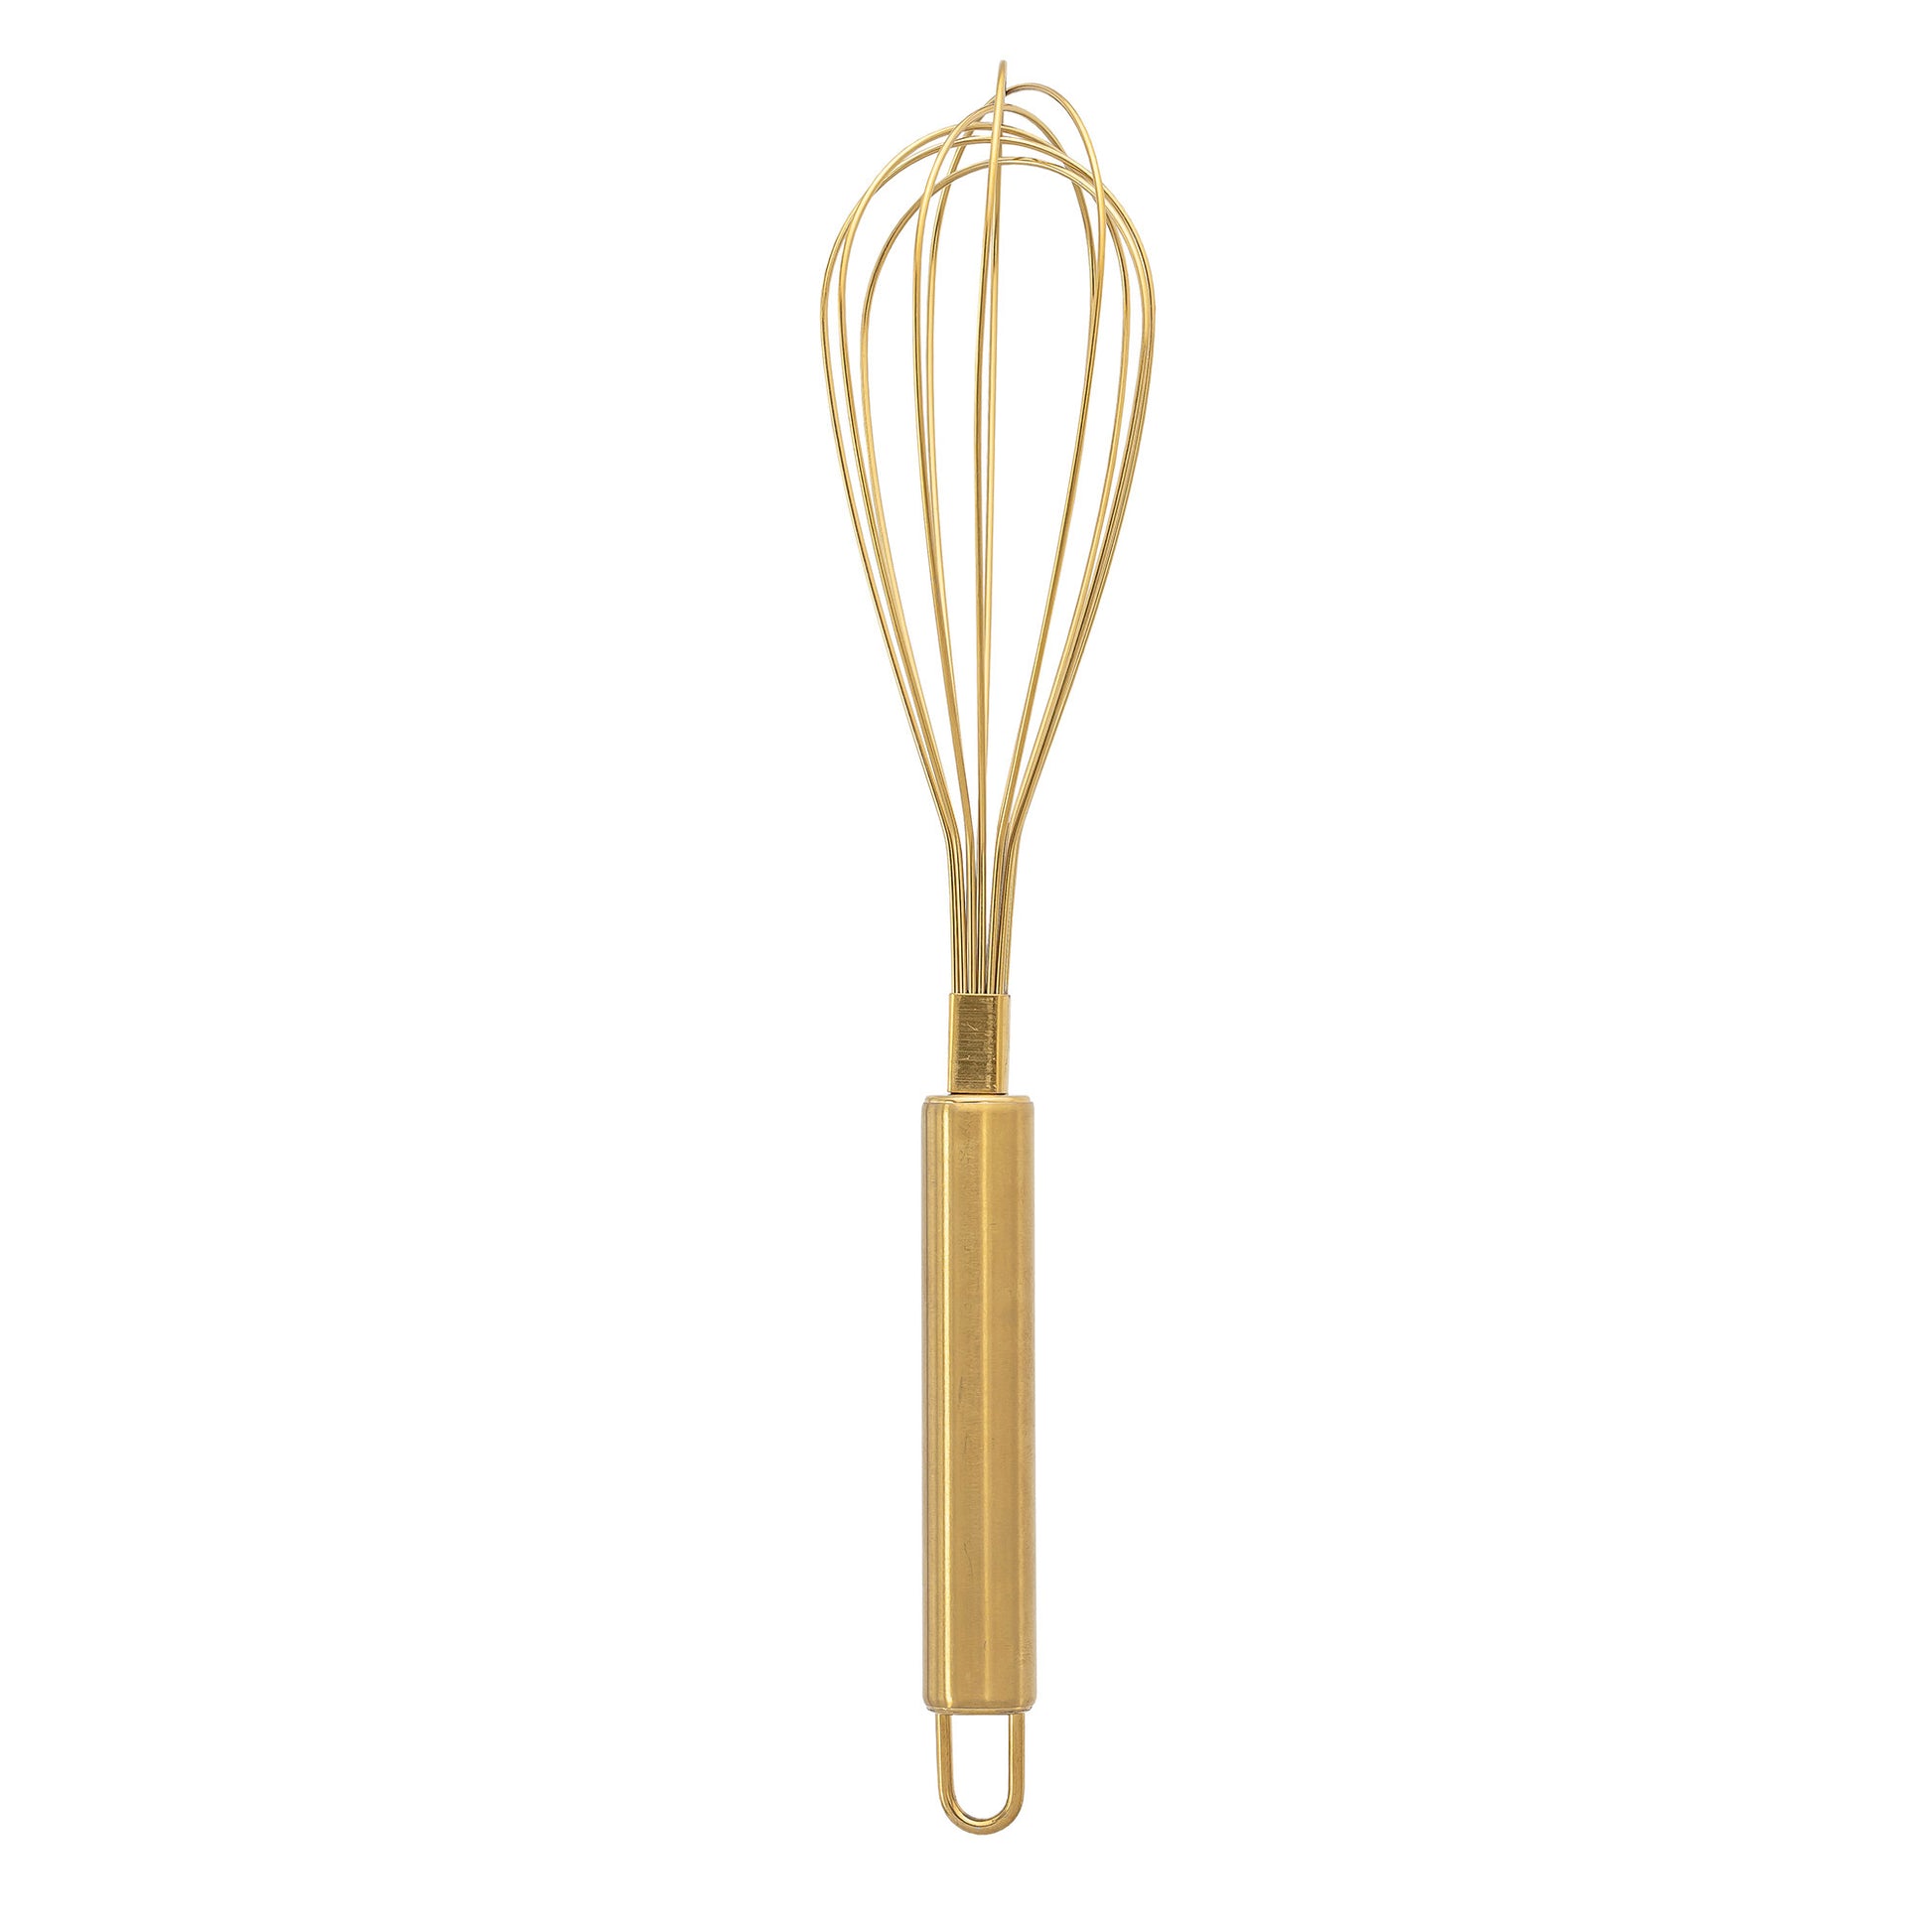 The Every Space gold stainless steel Fanila Whisk kitchen accessory by Bloomingville